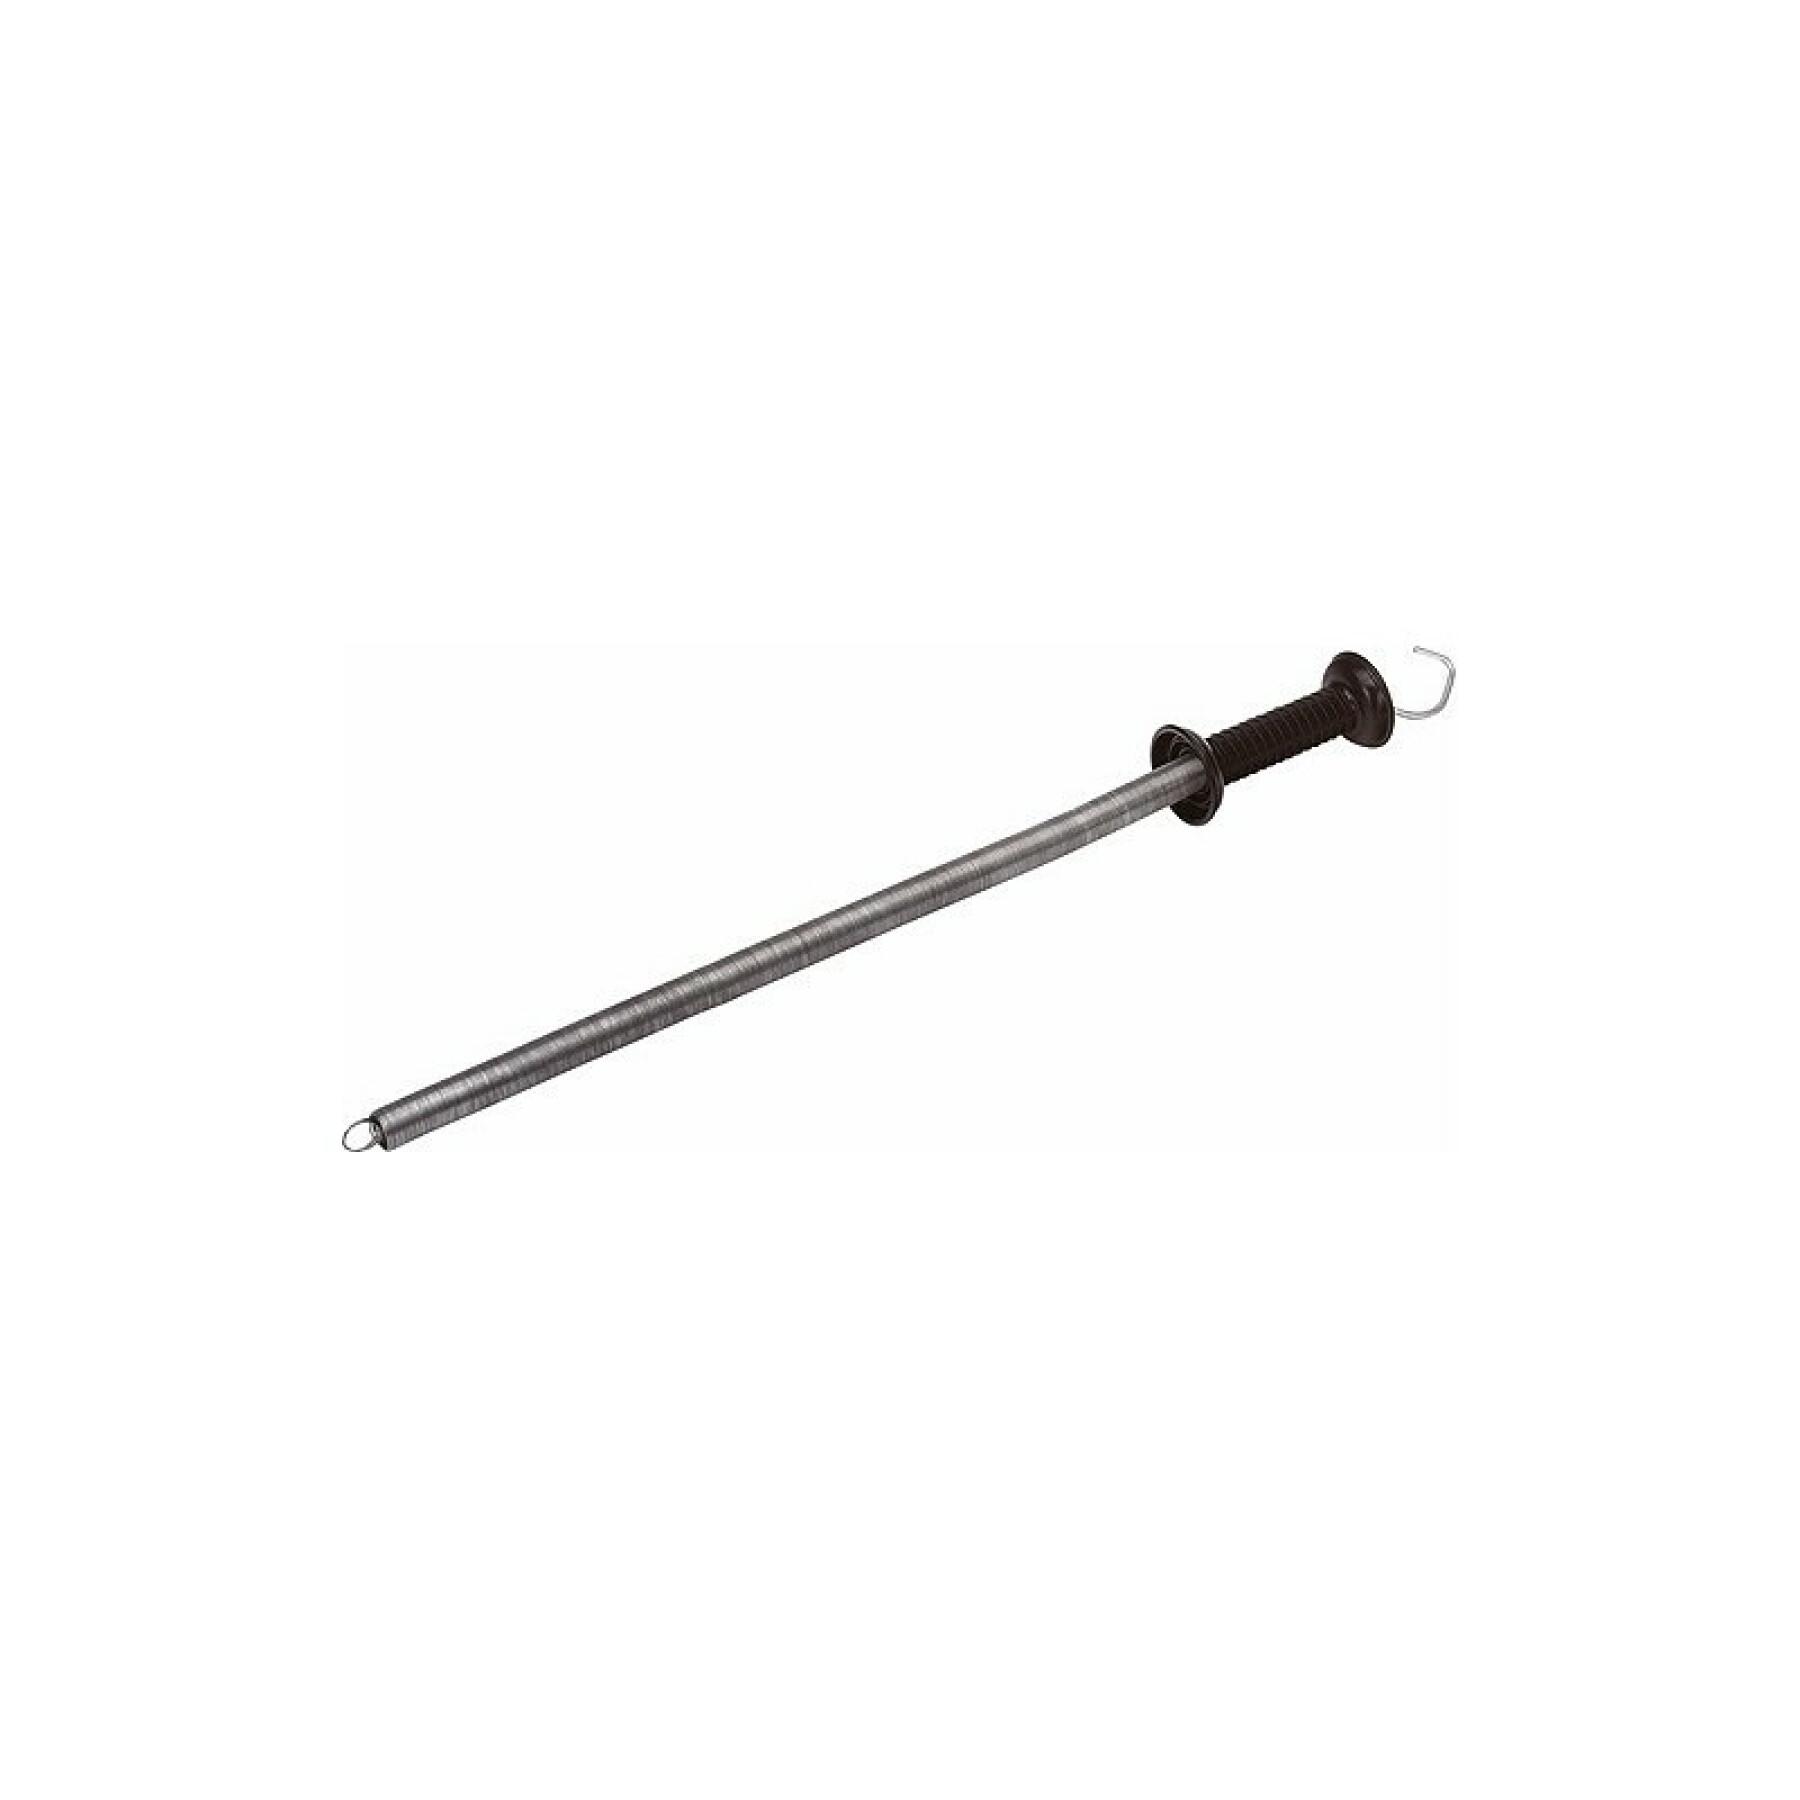 Insulating handle with integrated spring Beaumont